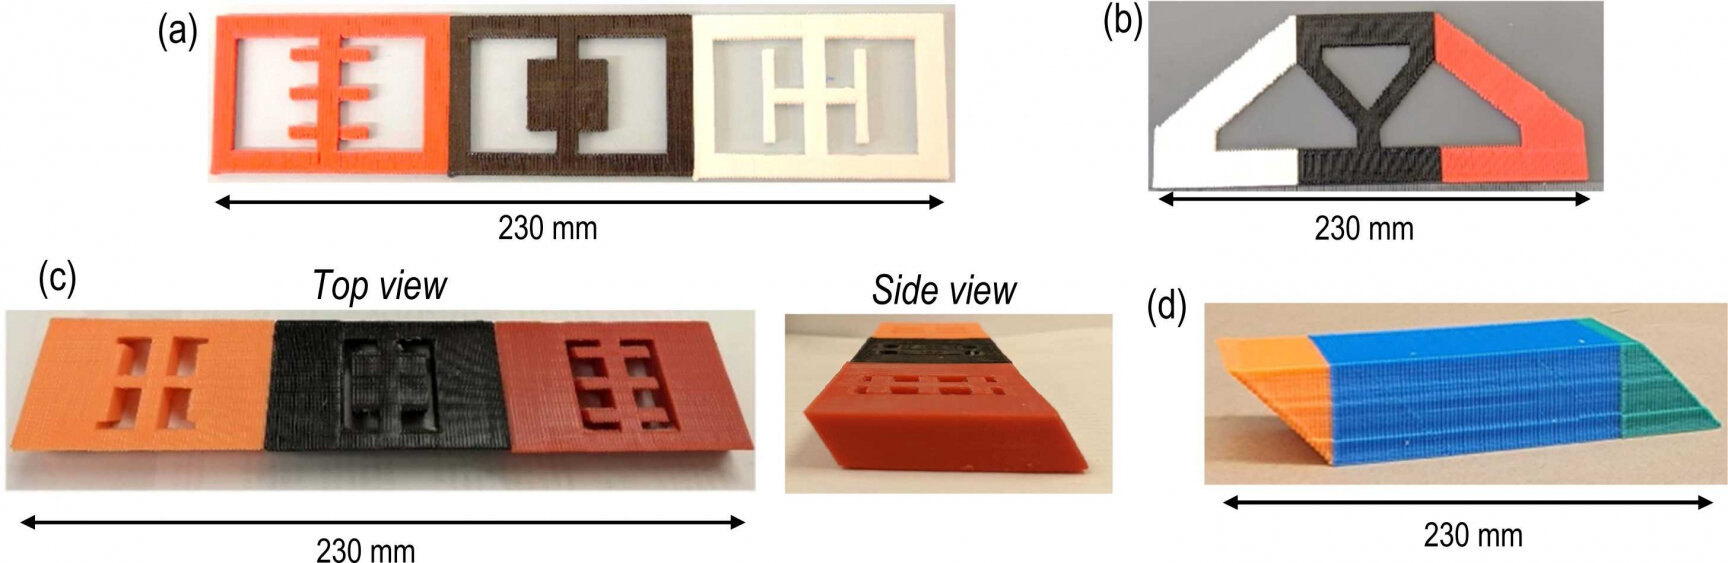 New 3D printing process is faster and more precise than conventional methods